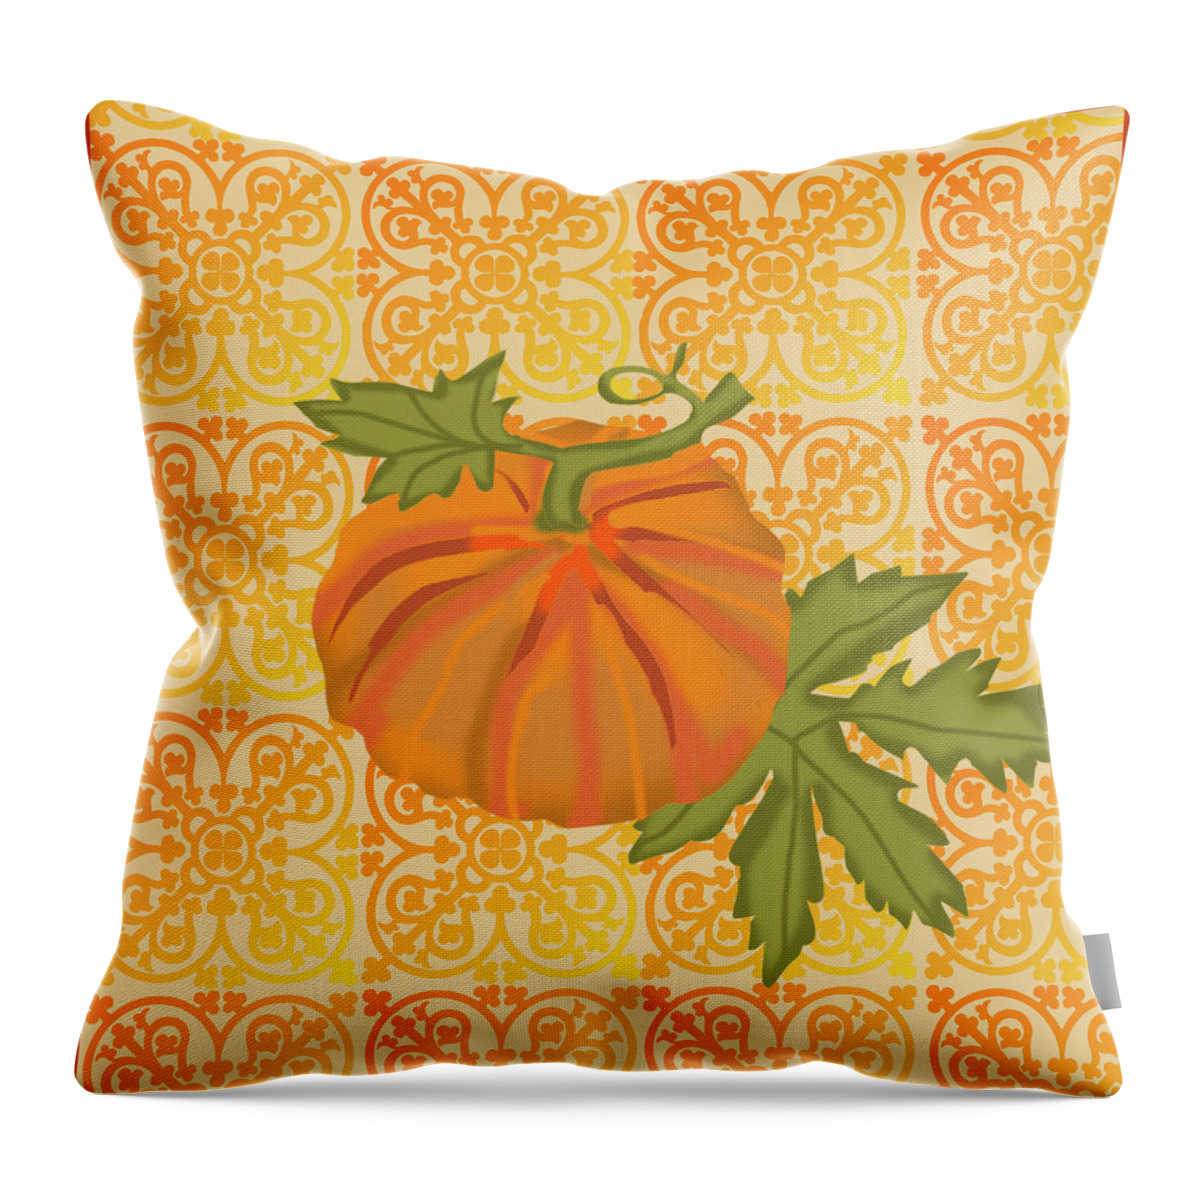 Pumpkin Throw Pillow featuring the mixed media Pumpkin And Tiles by Nicholas Biscardi